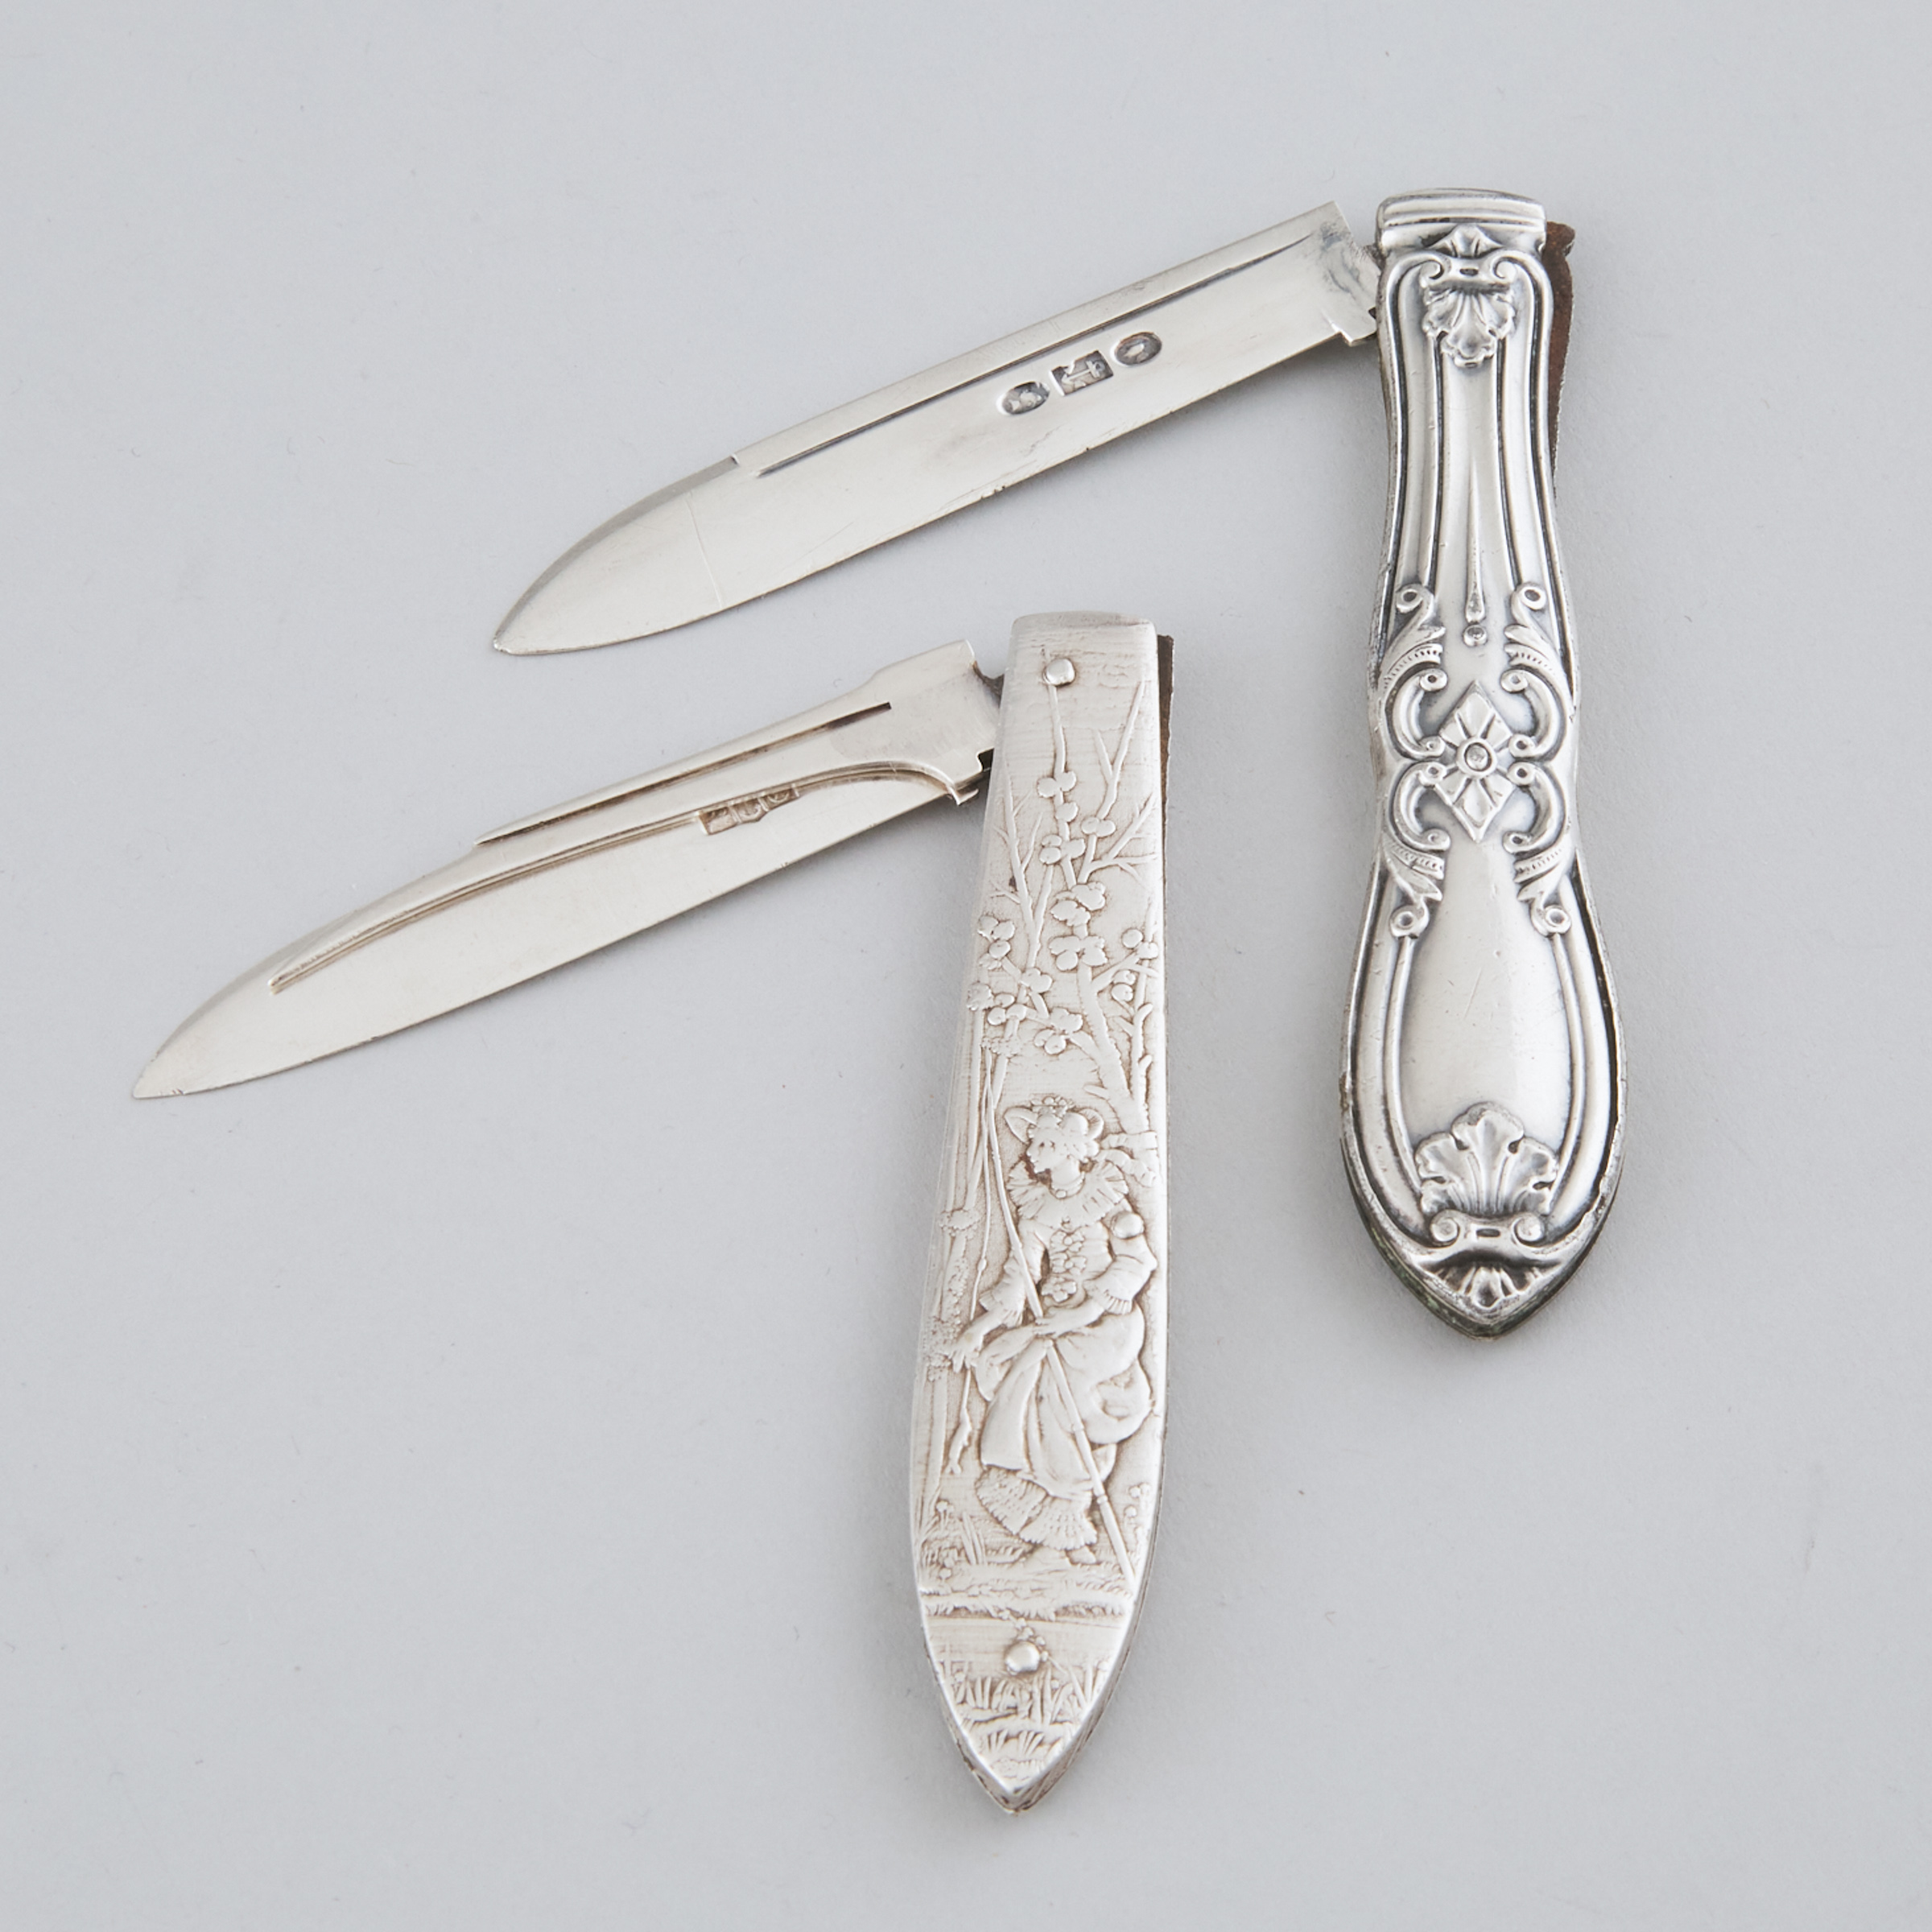 Two American Silver Pocket Knives, c.1900